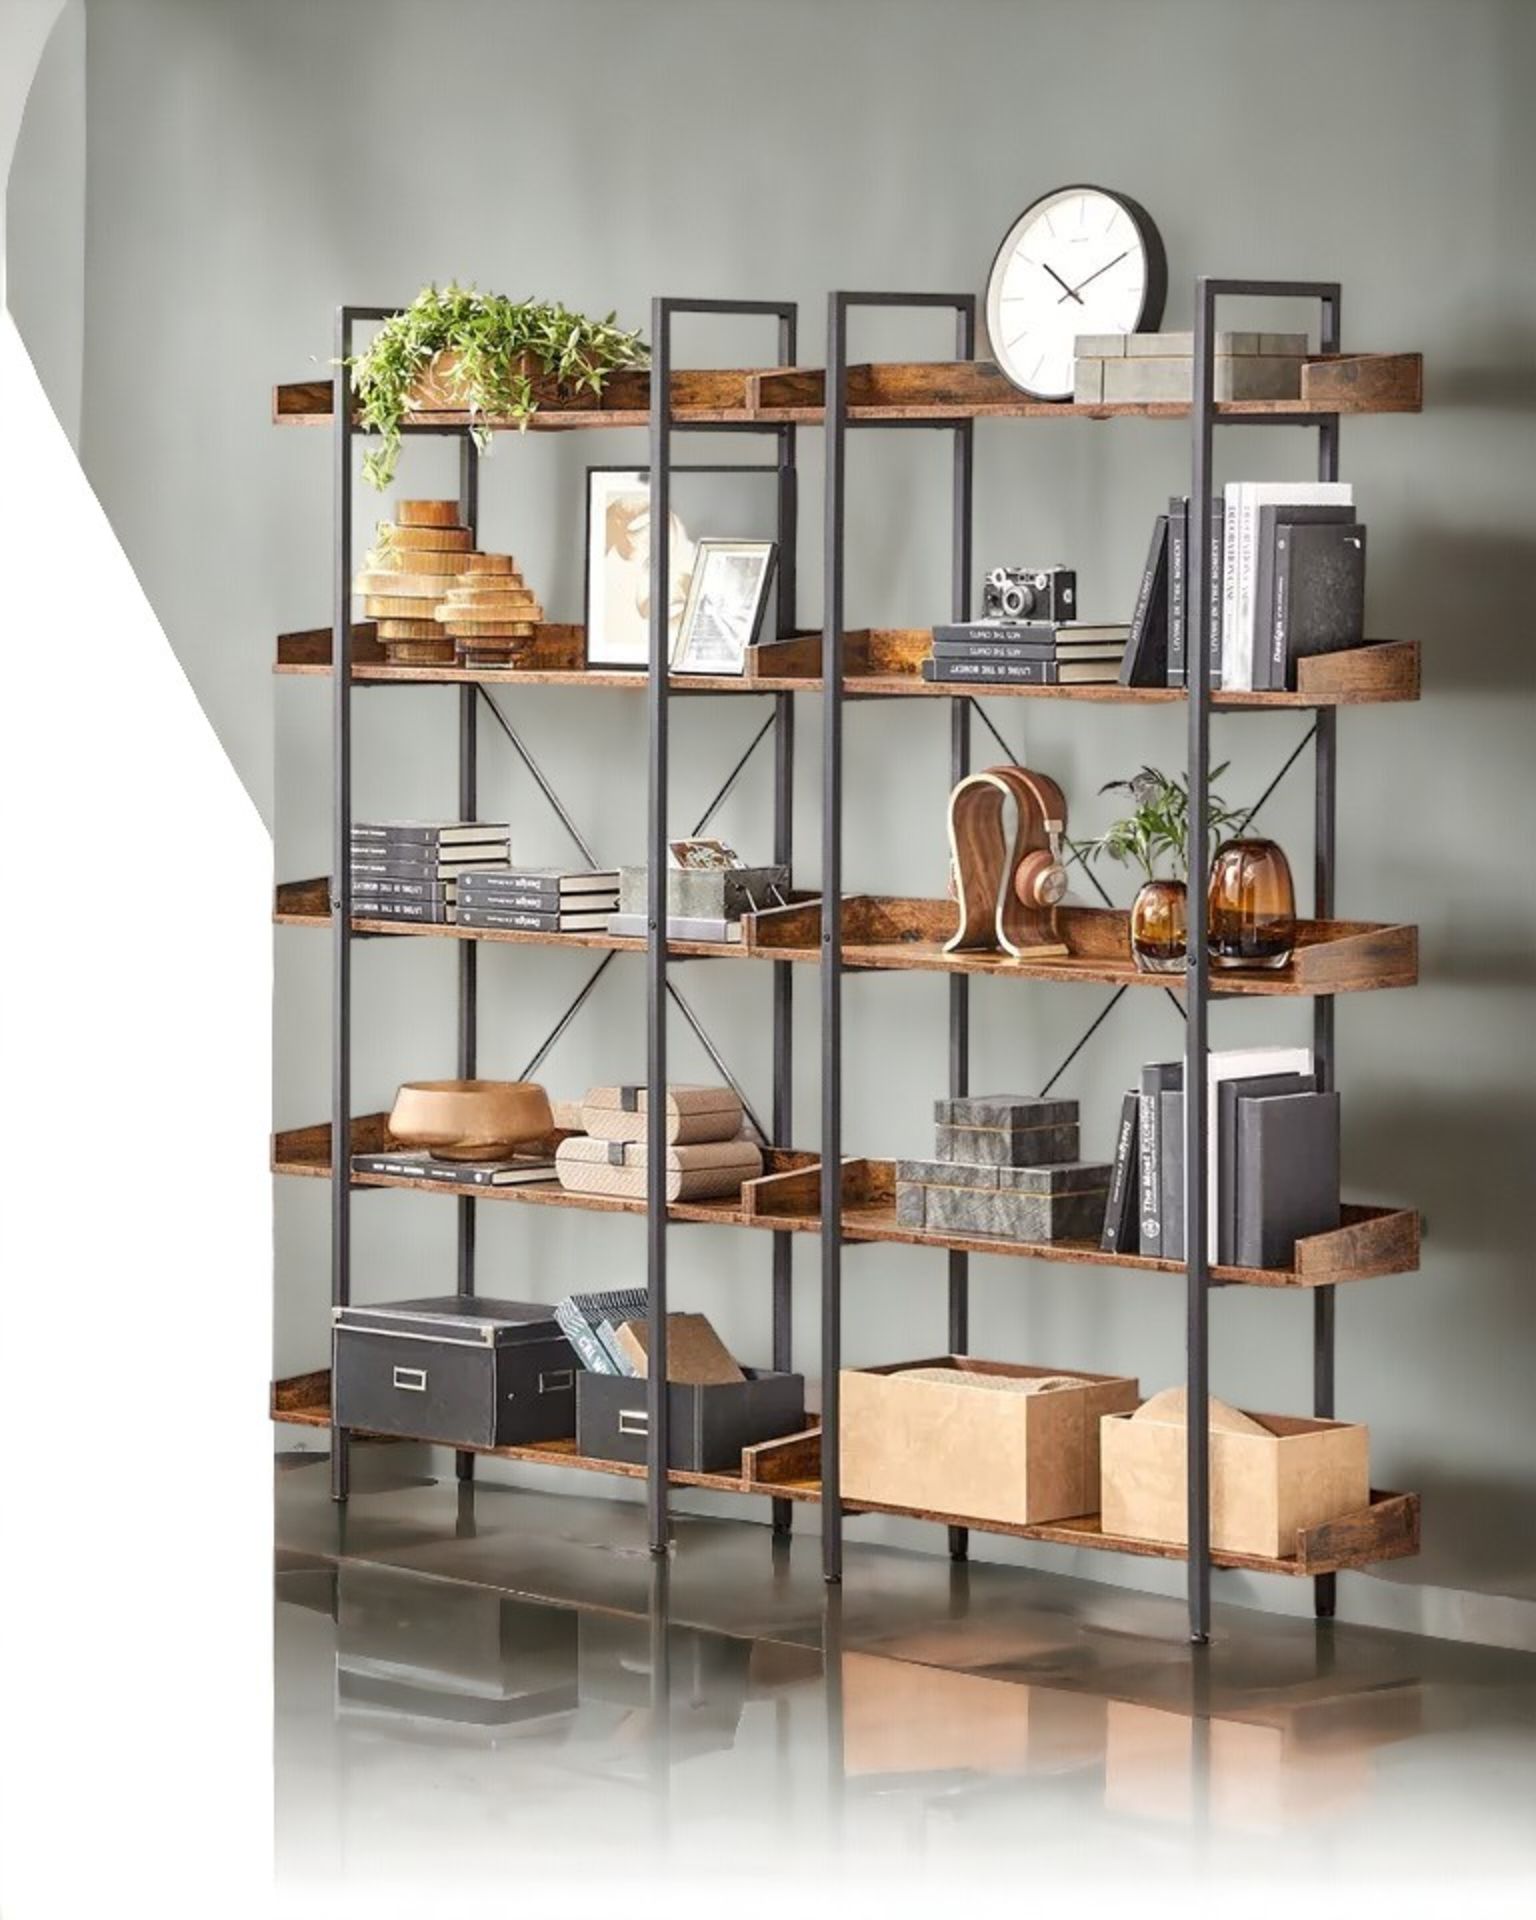 FREE DELIVERY - BRAND NEW BOOKCASE 5 TIER SHELF UNIT SPACIOUS STORAGE SHELVES